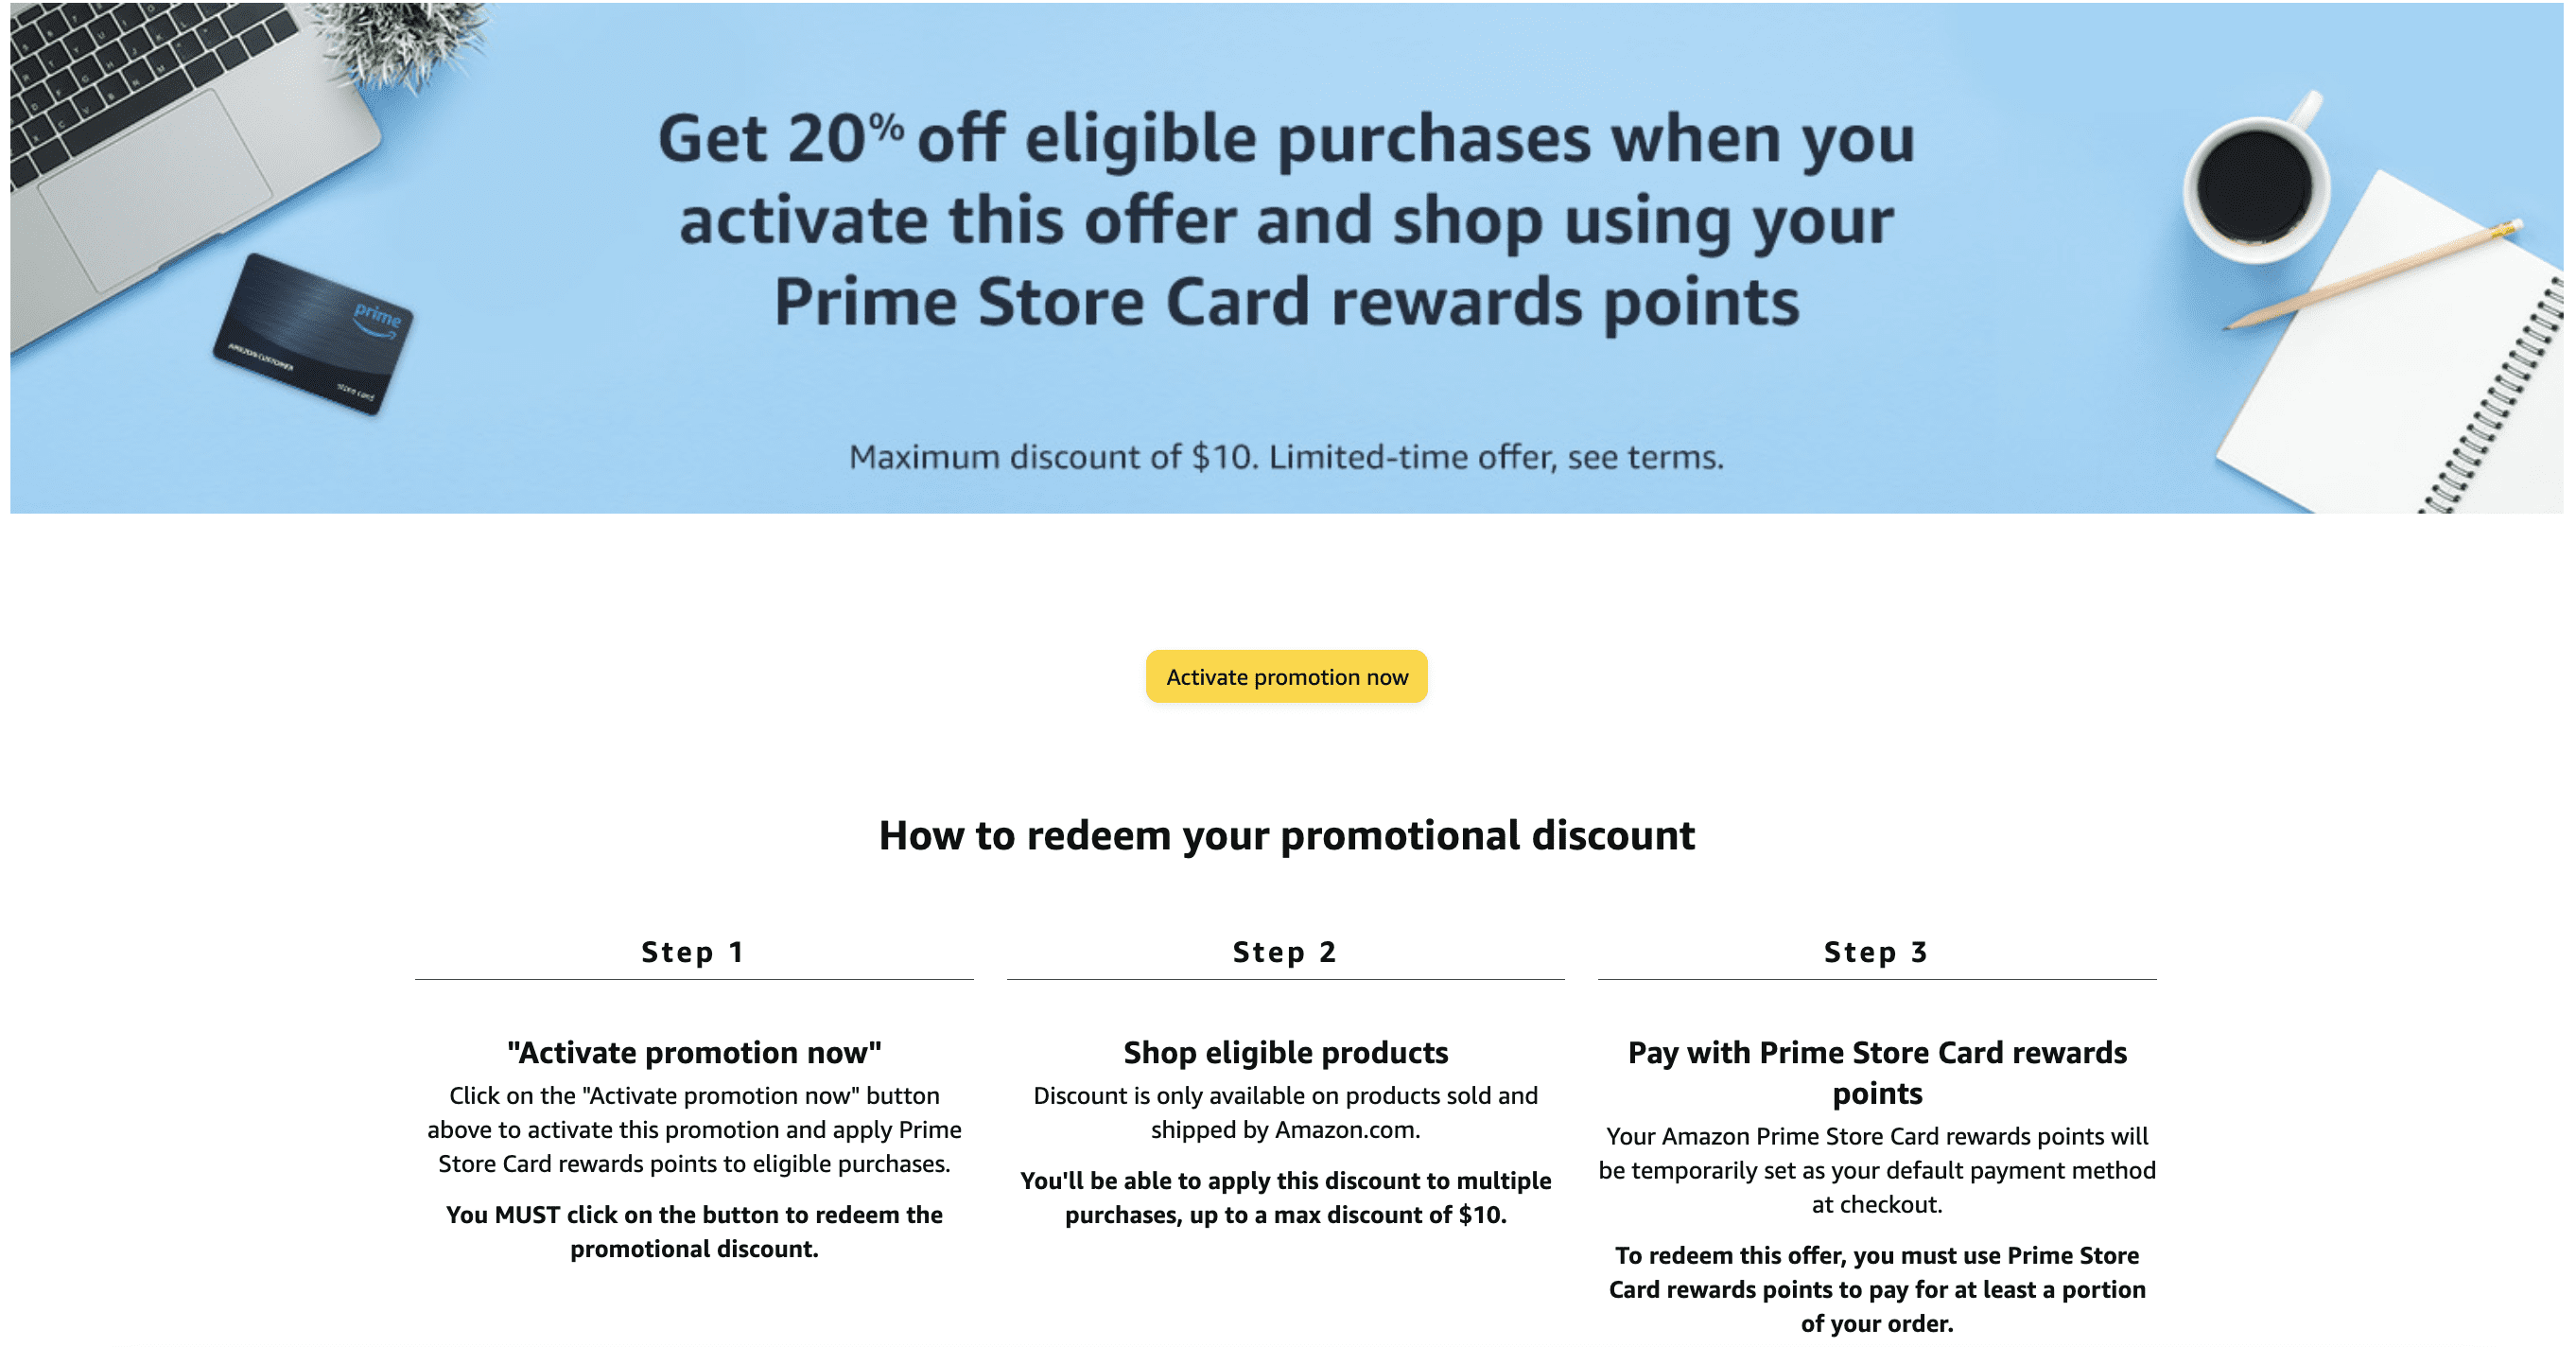 Expired]  Prime Synchrony Card: Use 1 Point & Get 20% Off  (Max  $10 Discount) - Doctor Of Credit